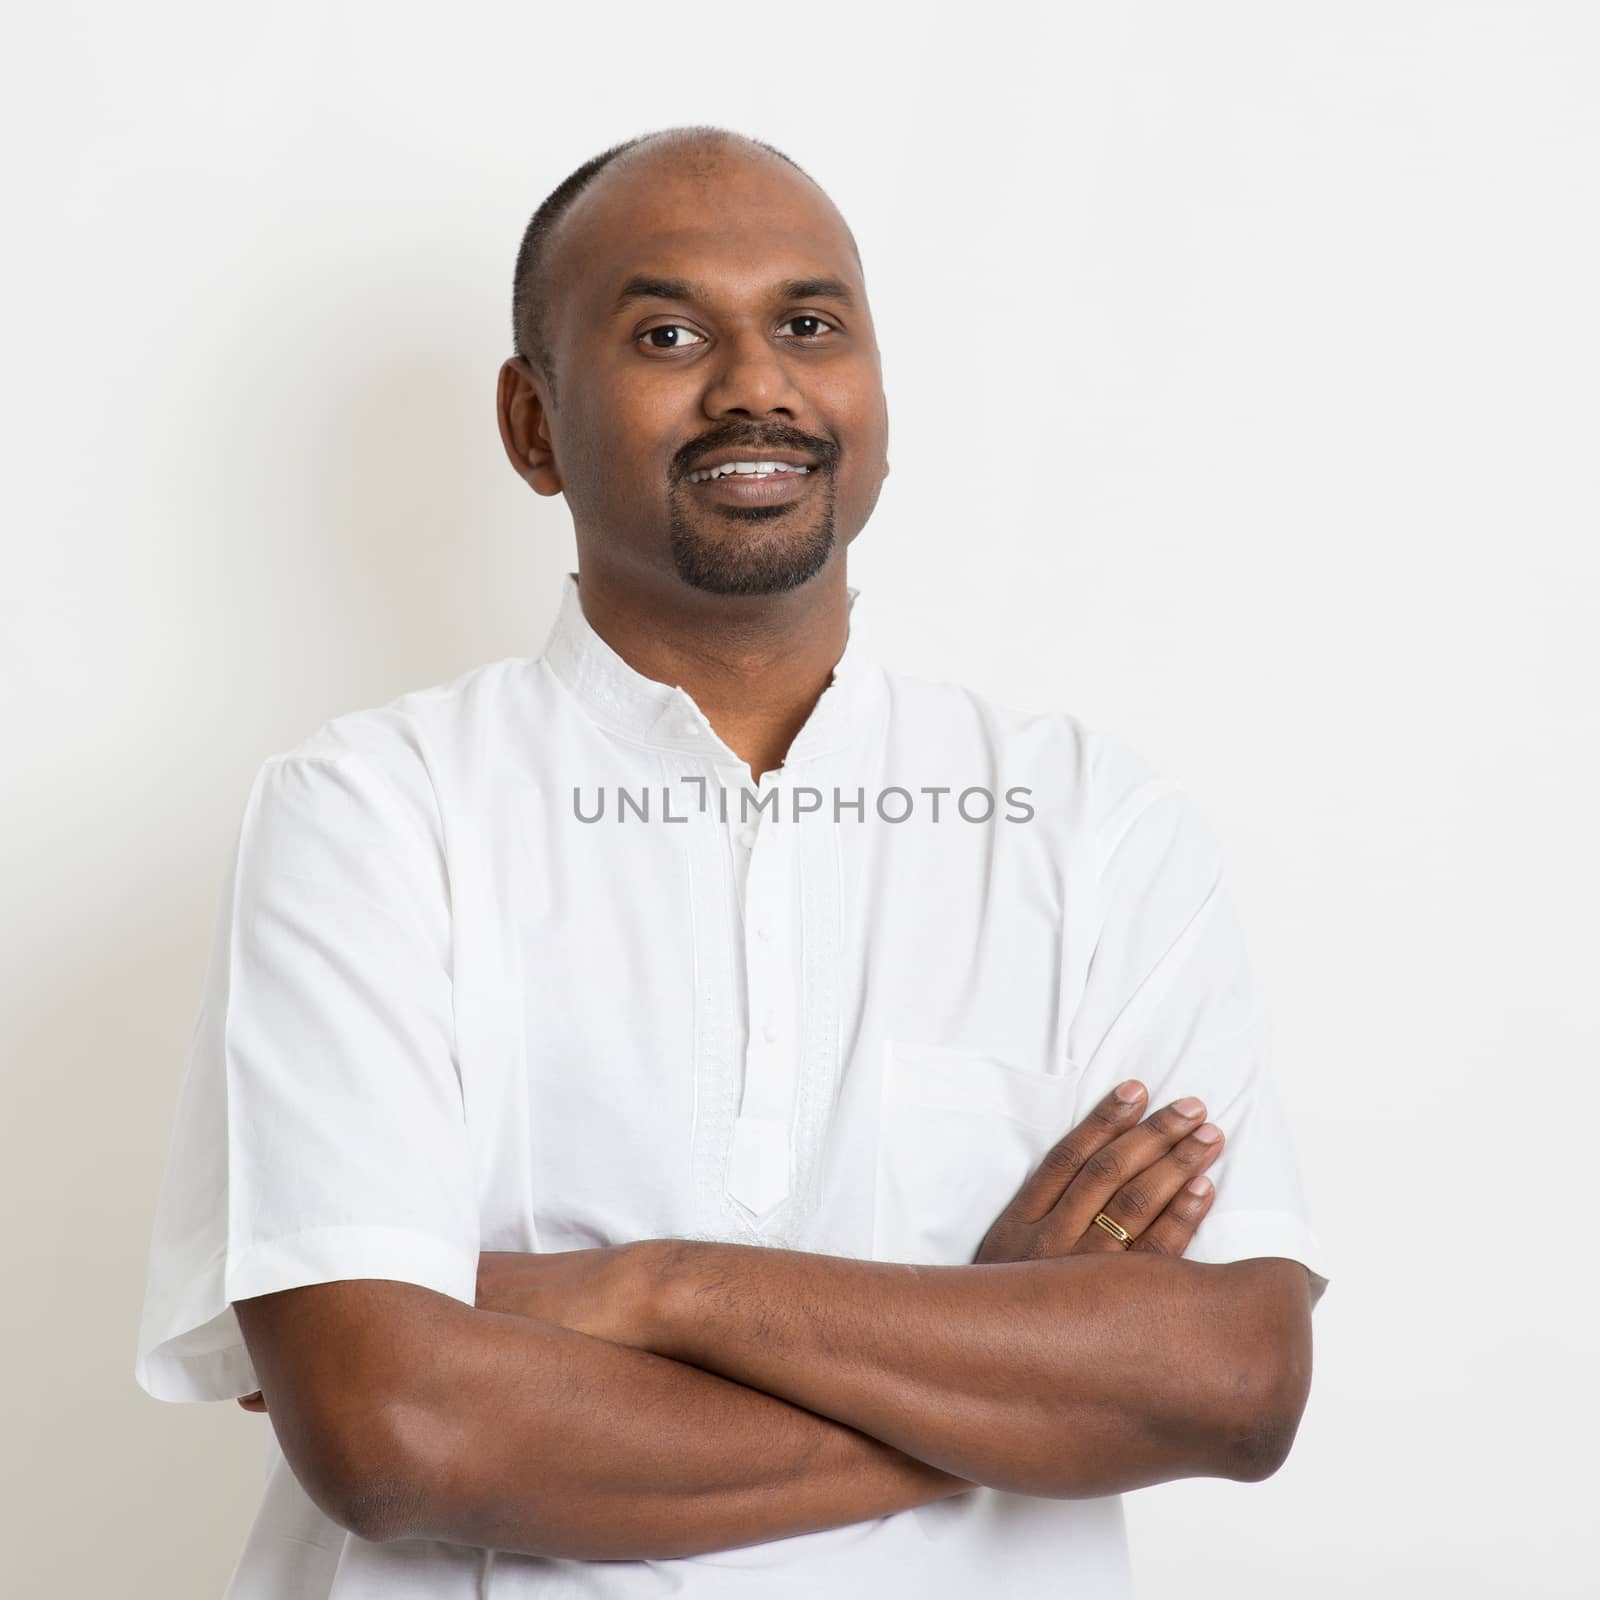 Portrait of happy mature casual business Indian man, standing on plain background with shadow.